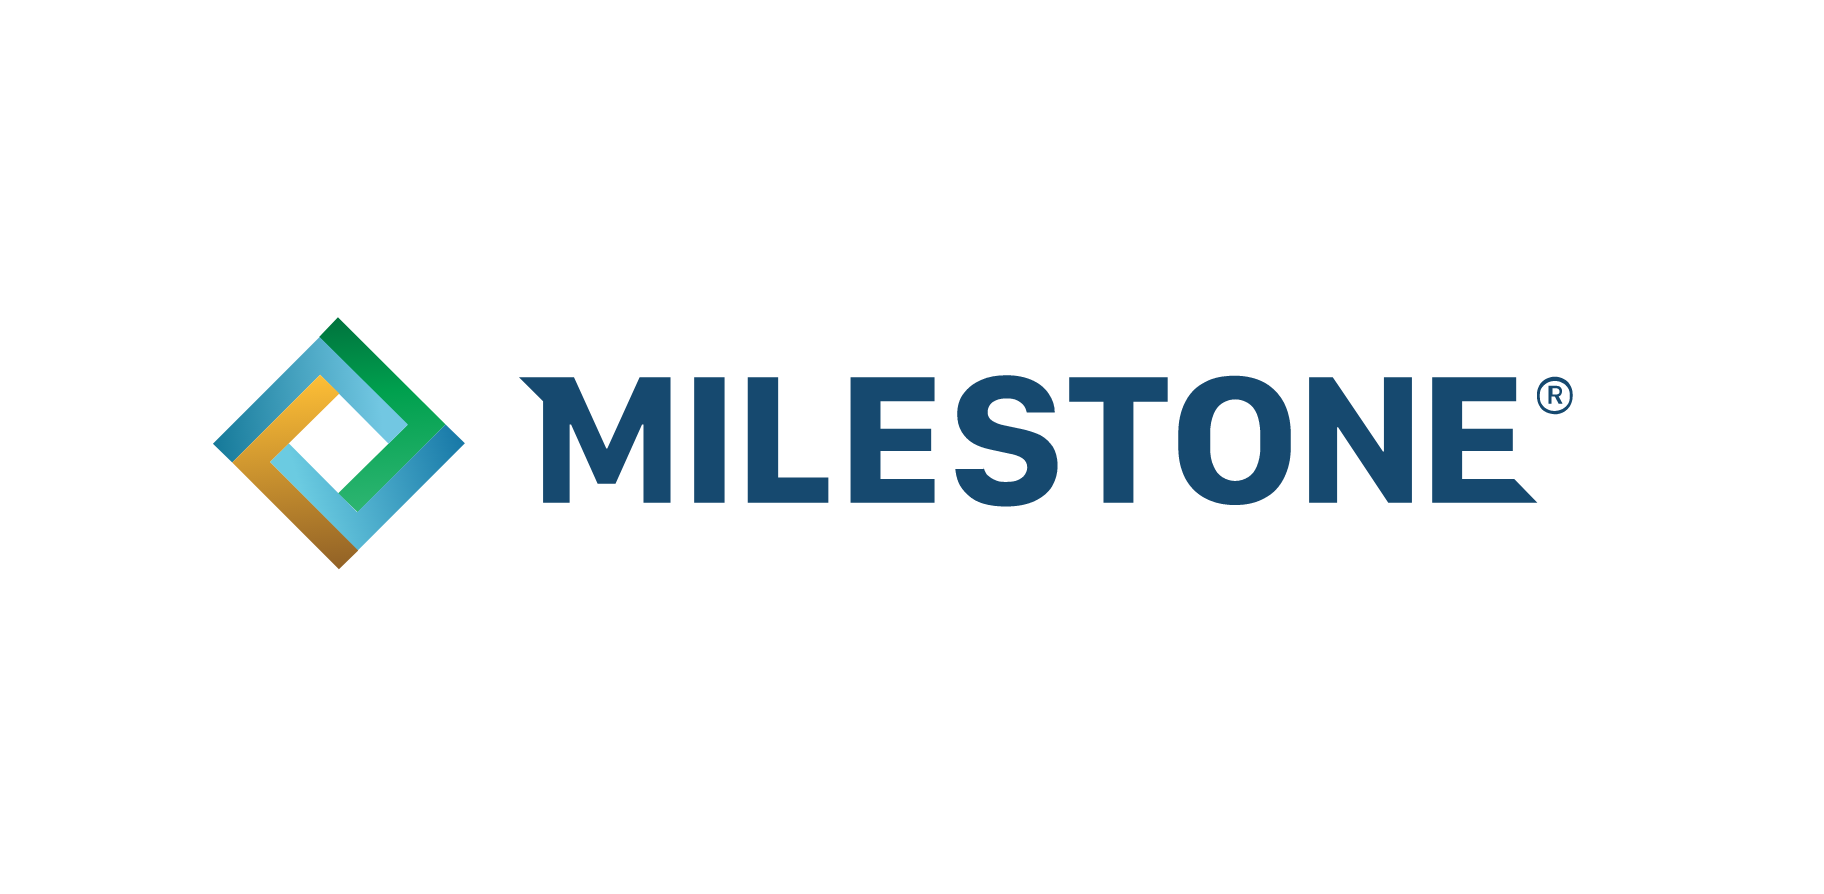 Find out how the application process works! Source: Milestone®.